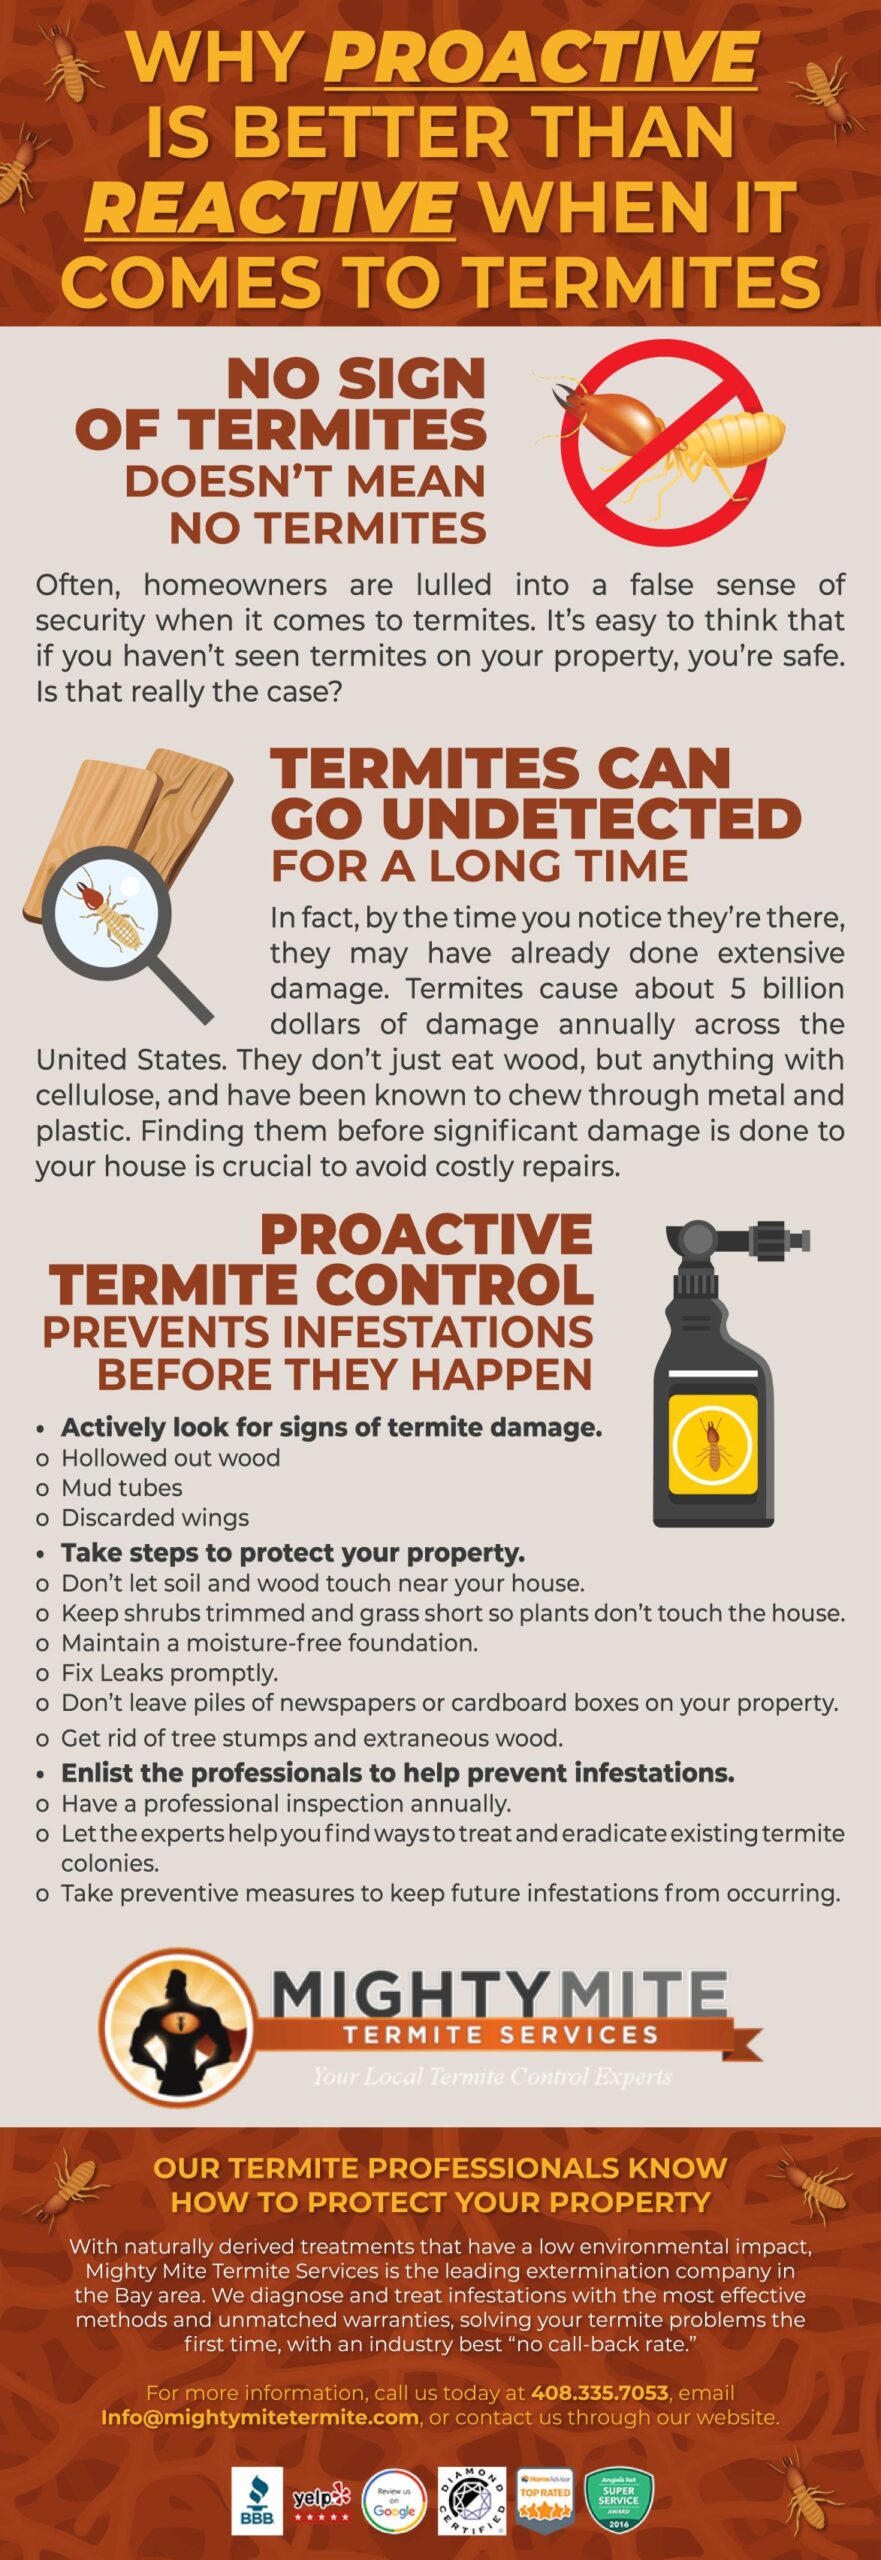 Proactive is Better than Reactive When it comes to Termites